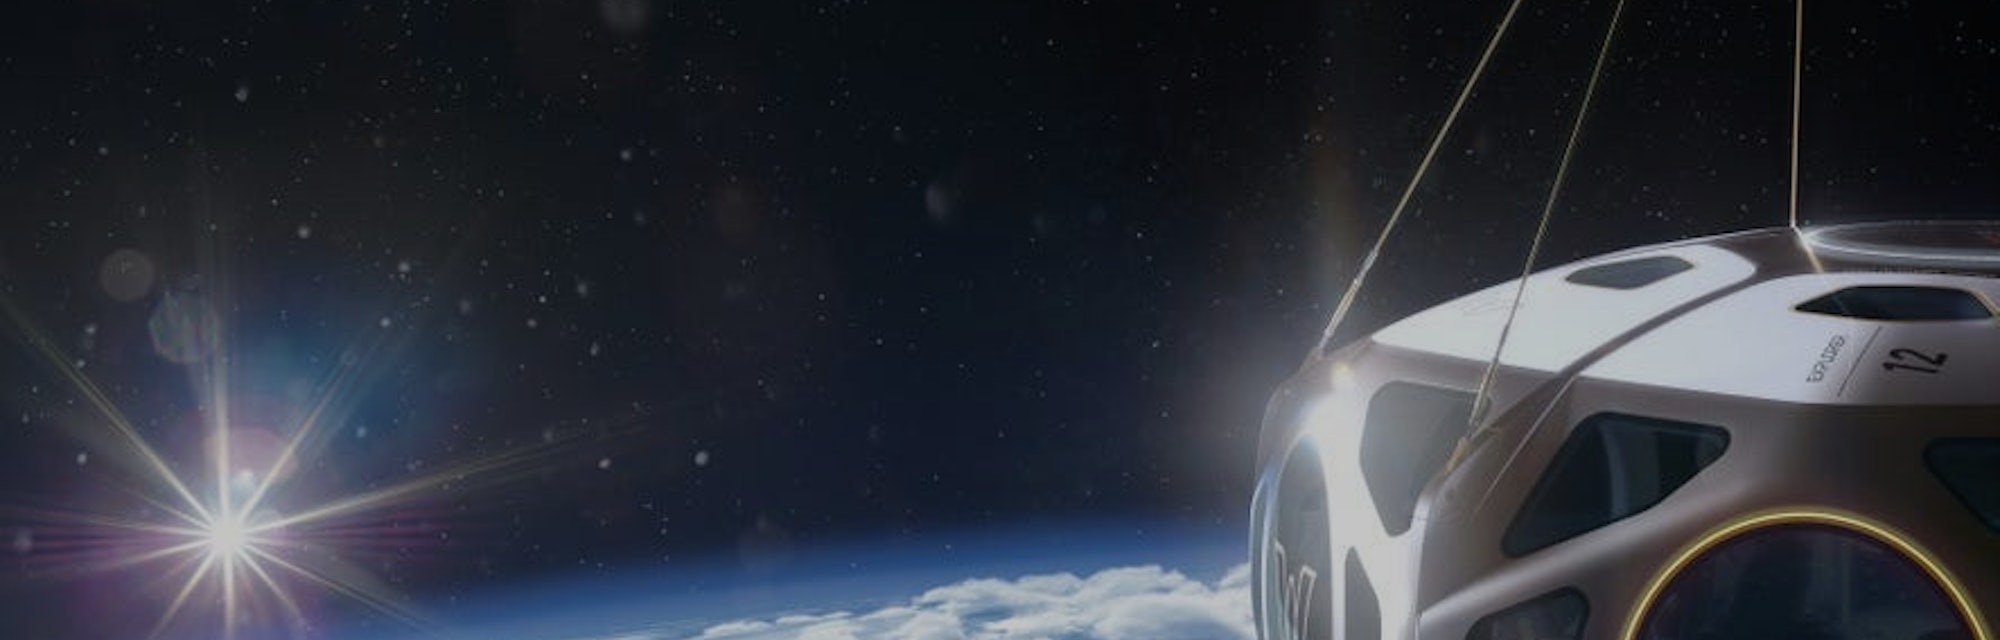 World View, a maker of stratospheric balloons, wants to create its own space tourism business.